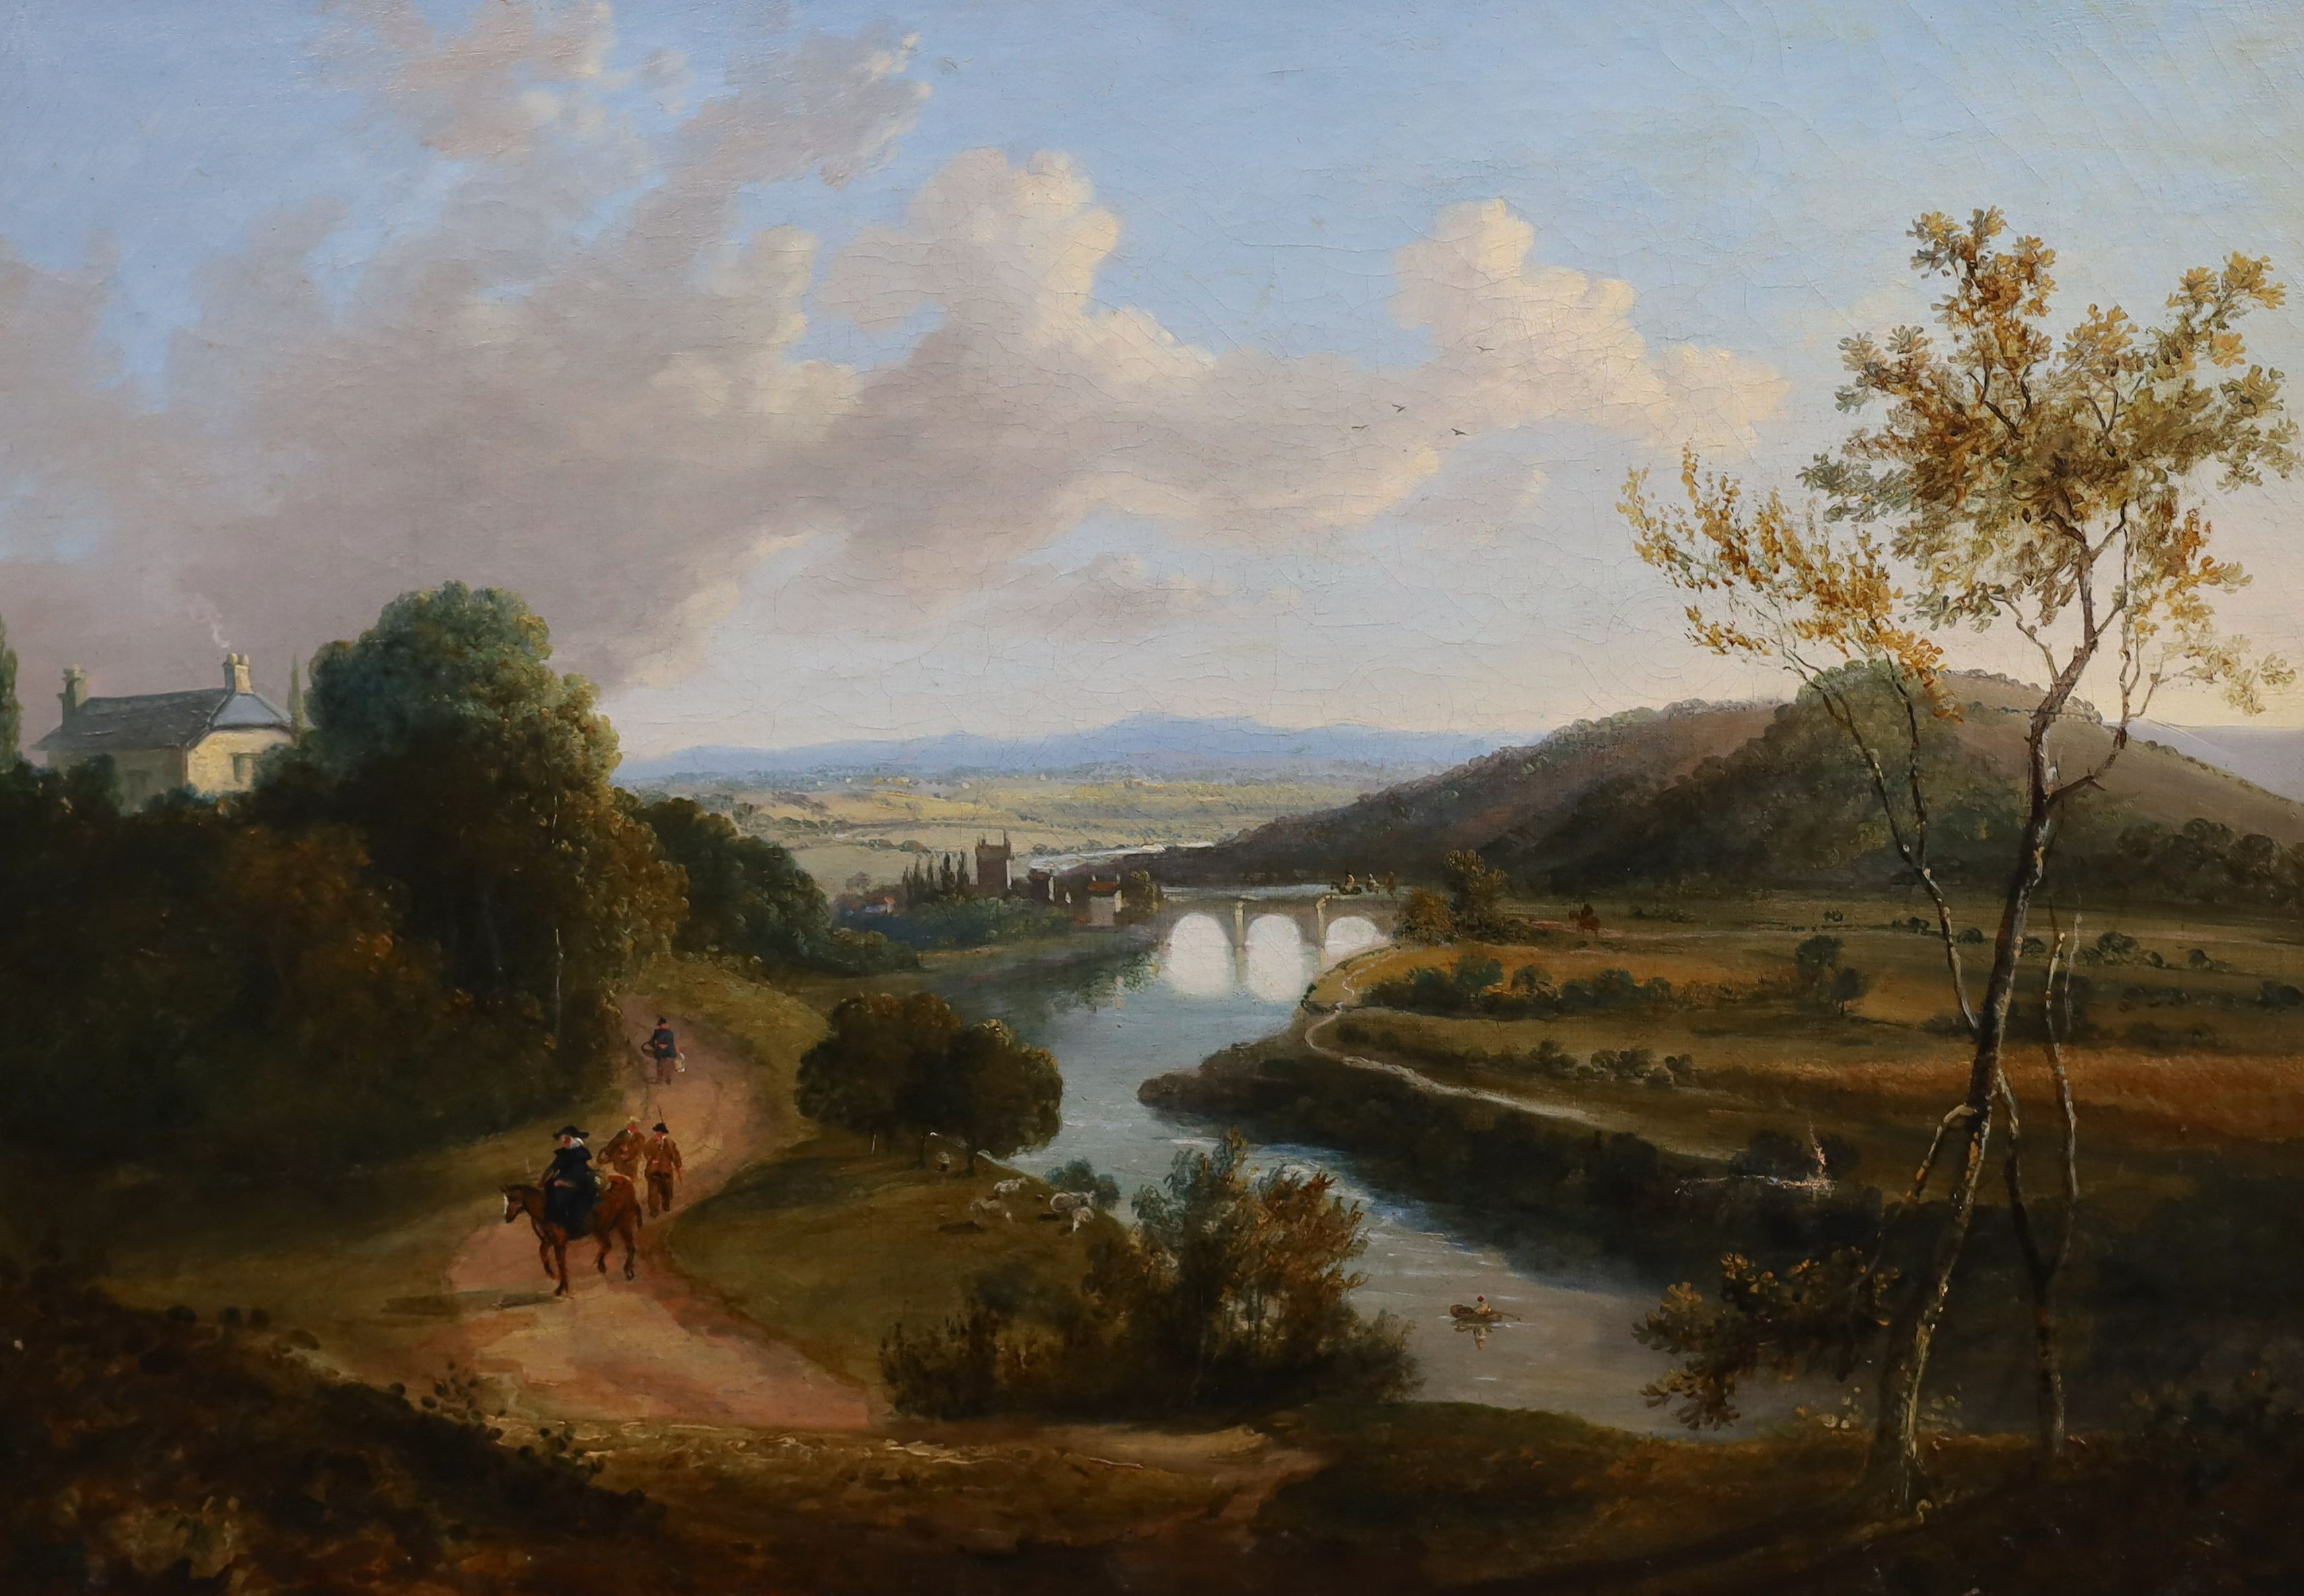 Attributed to John Laporte (1769-1839), Extensive river landscape with clergyman and other figures on a lane, oil on canvas, 34 x 49cm